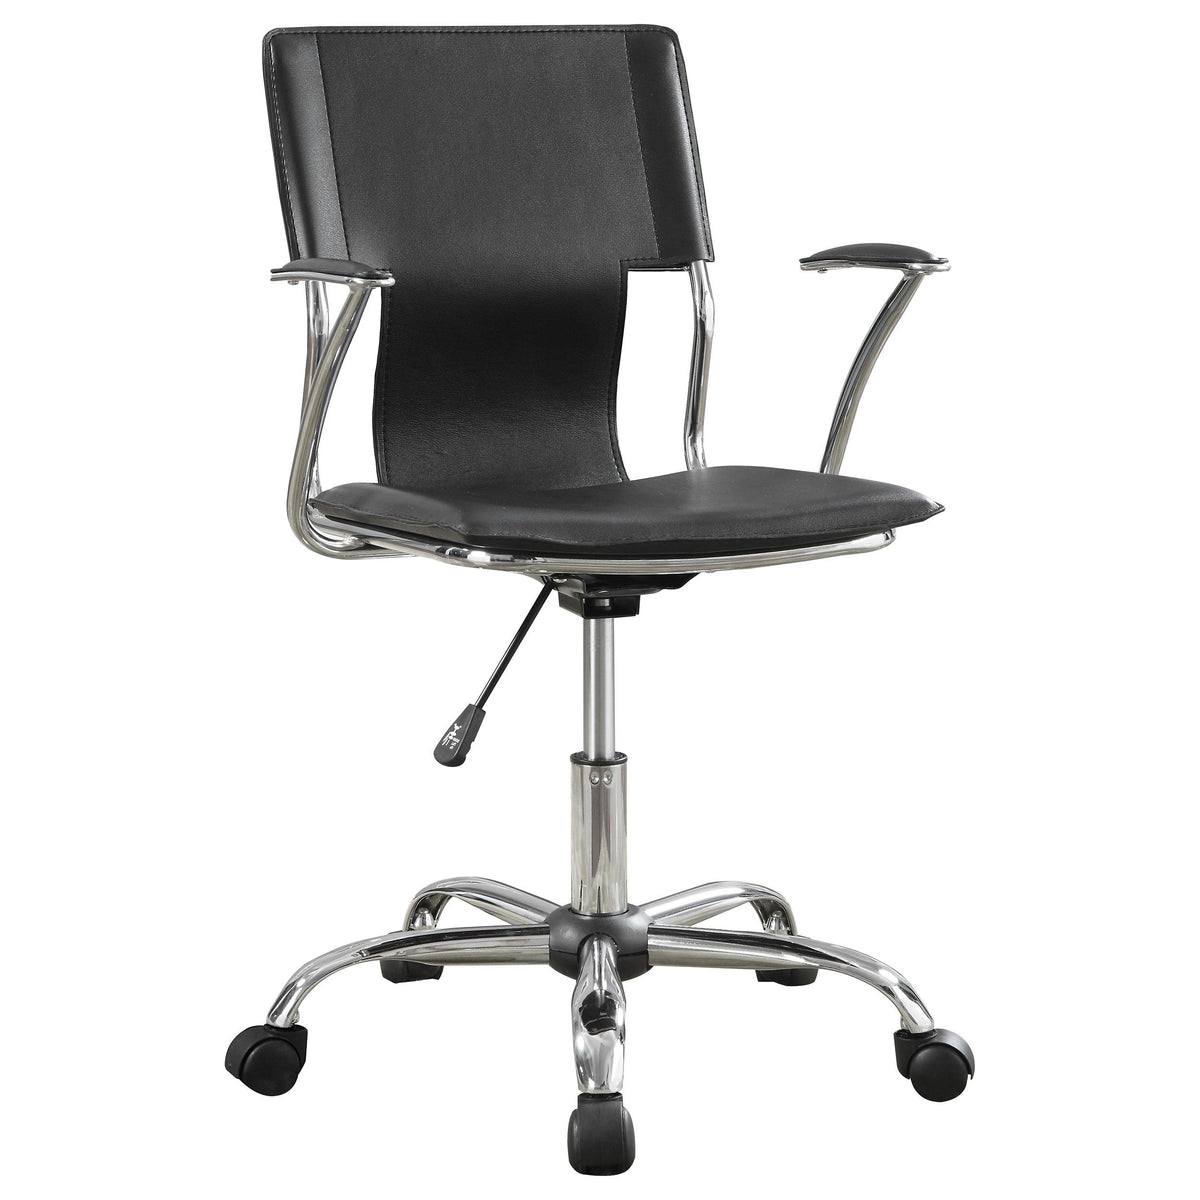 Himari Adjustable Height Office Chair Black and Chrome  Las Vegas Furniture Stores